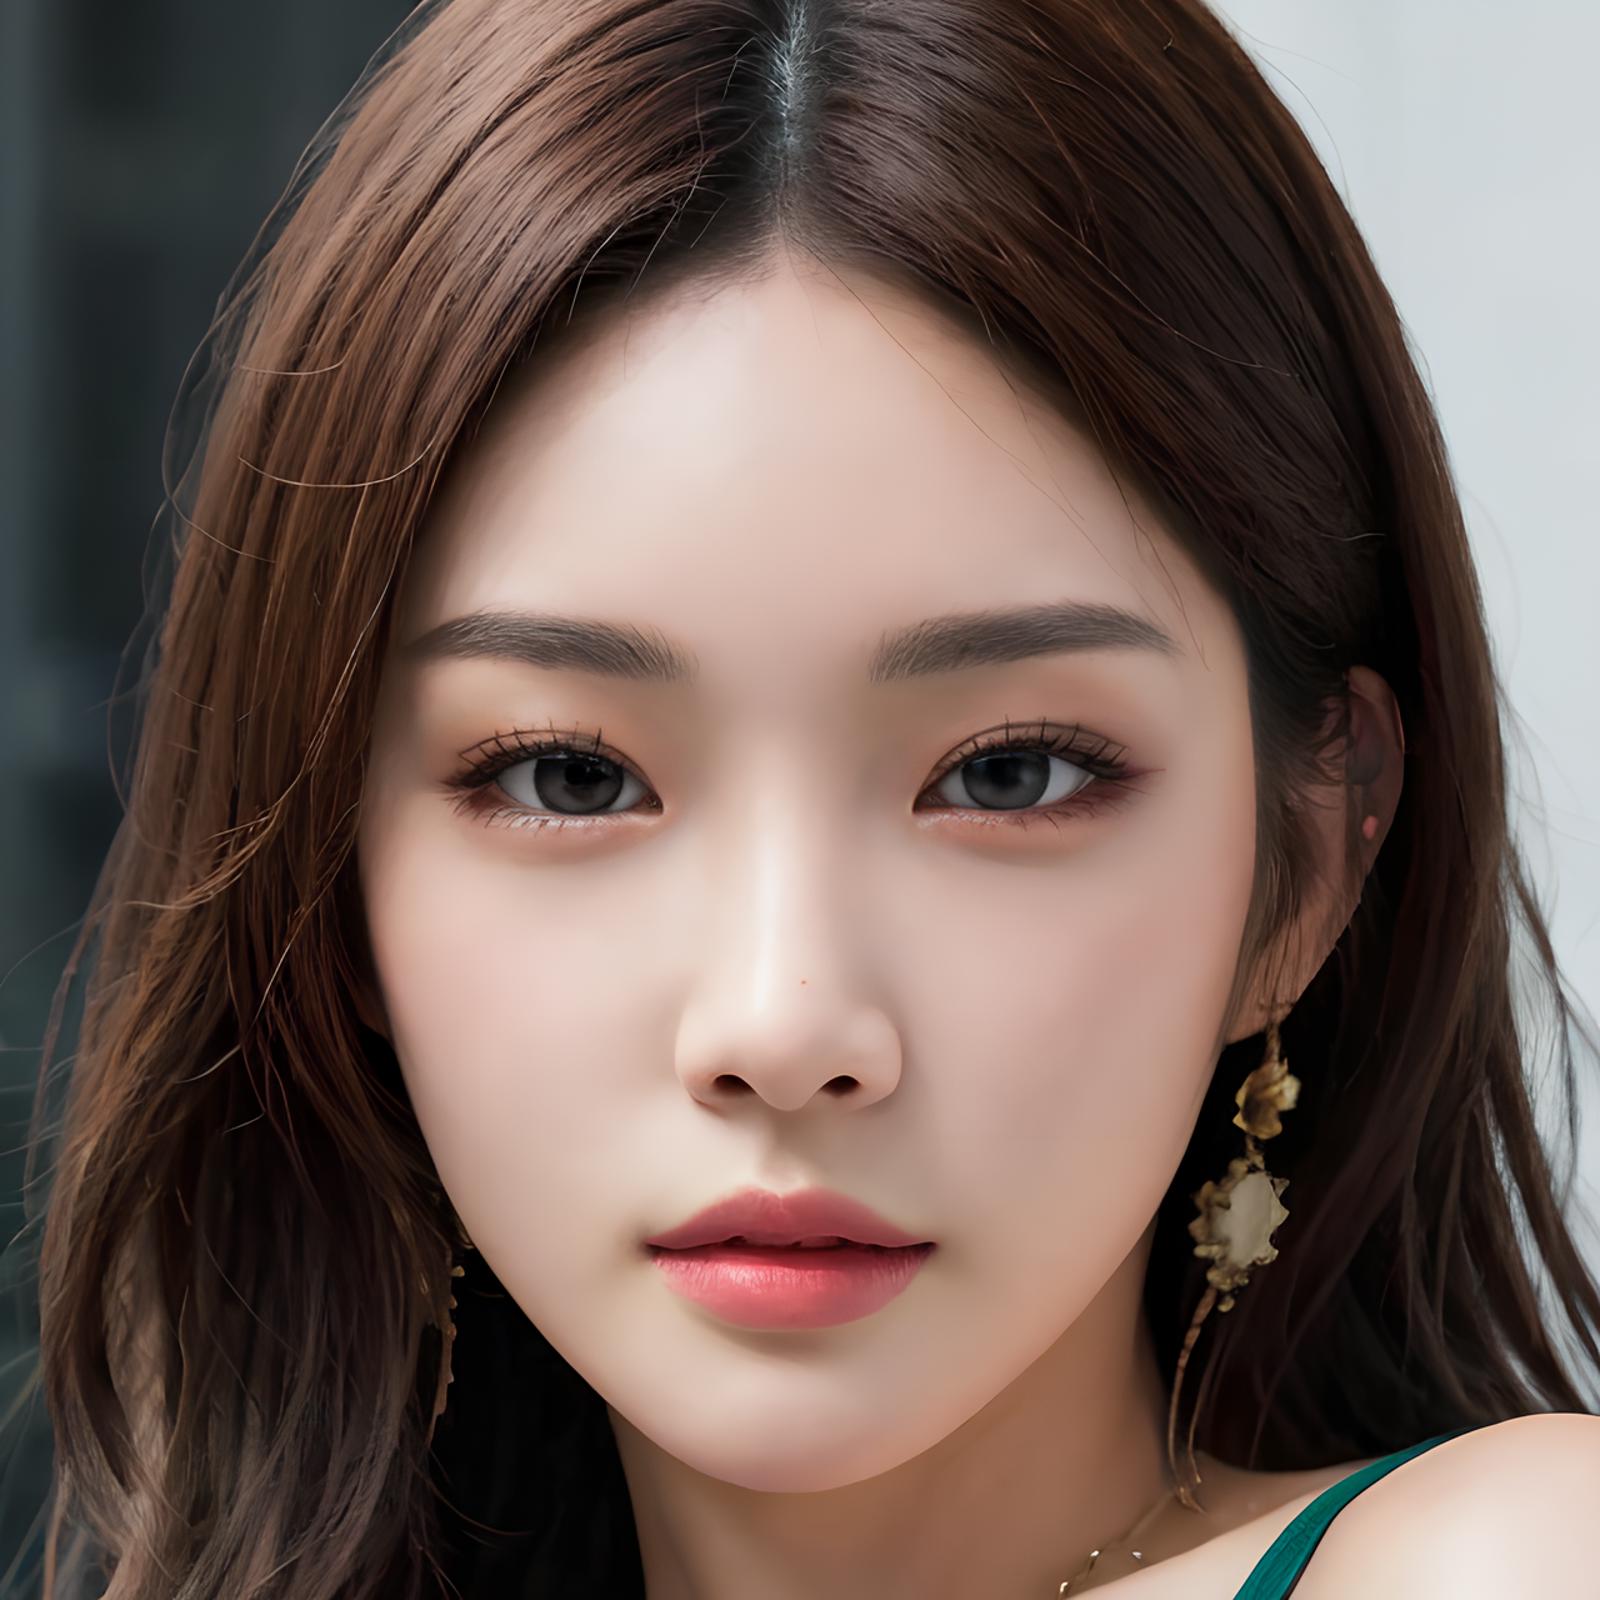 Not Chungha image by Tissue_AI